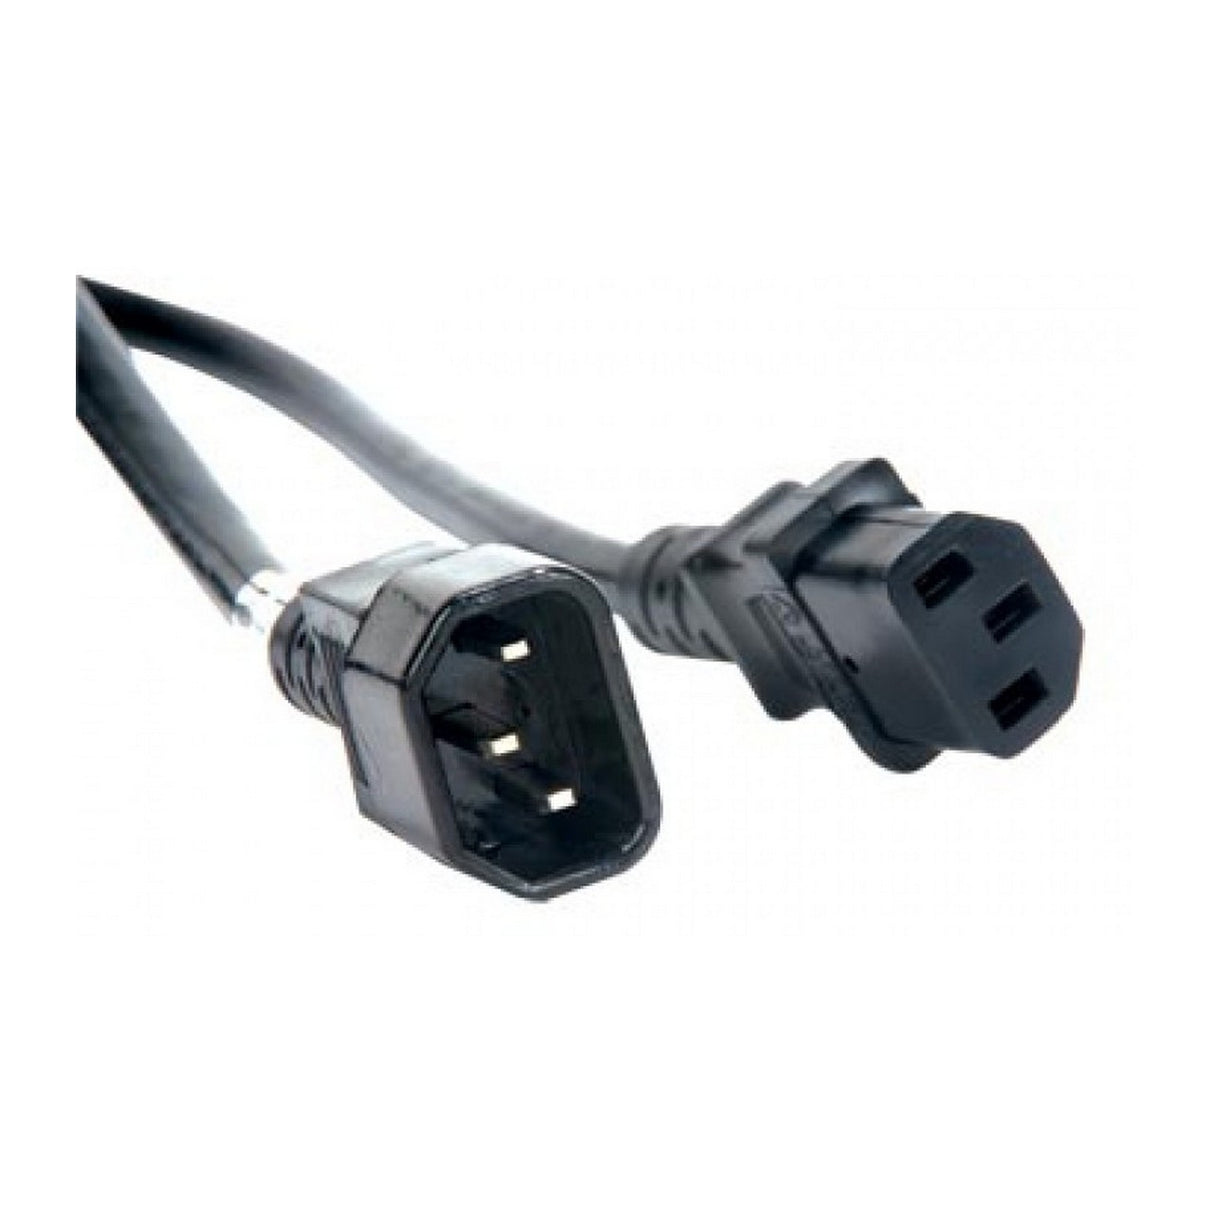 Accu Cable ECCOM-3 | 3ft IEC Male to Female AC Extension Power Cord Black